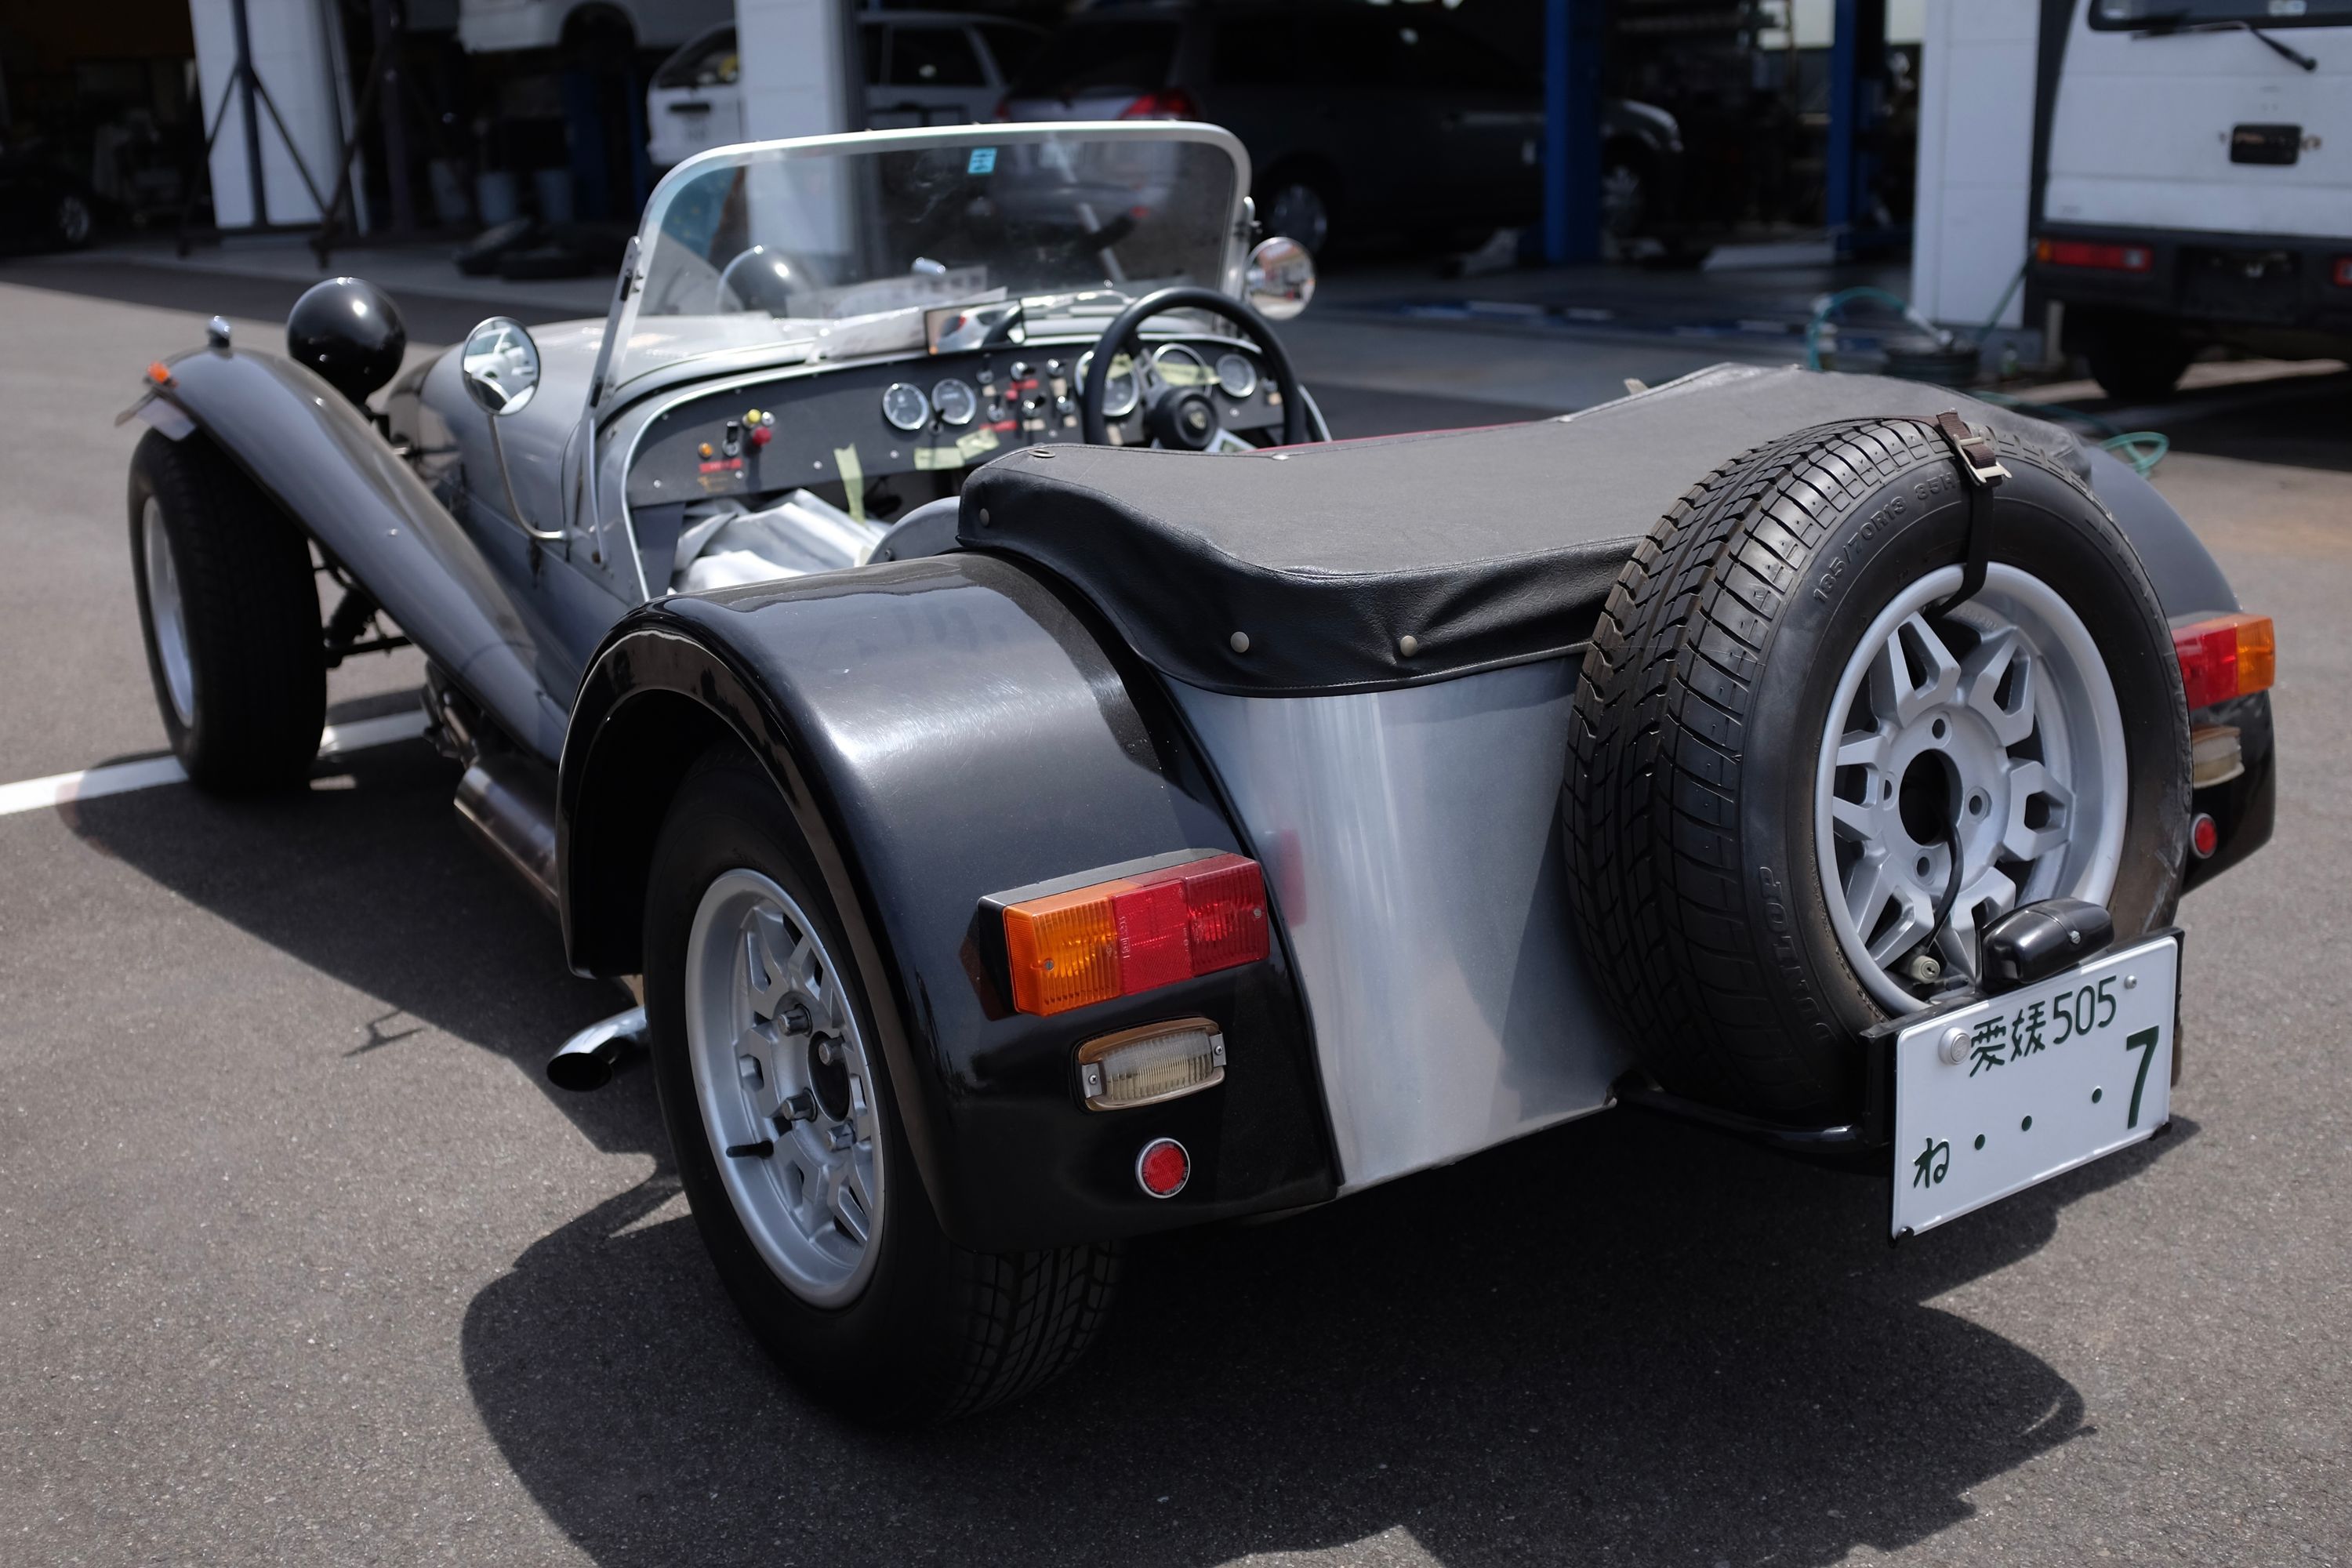 A silver and black Caterham Seven roadster whose Matsuyama license plate spells “わ.. .7”.